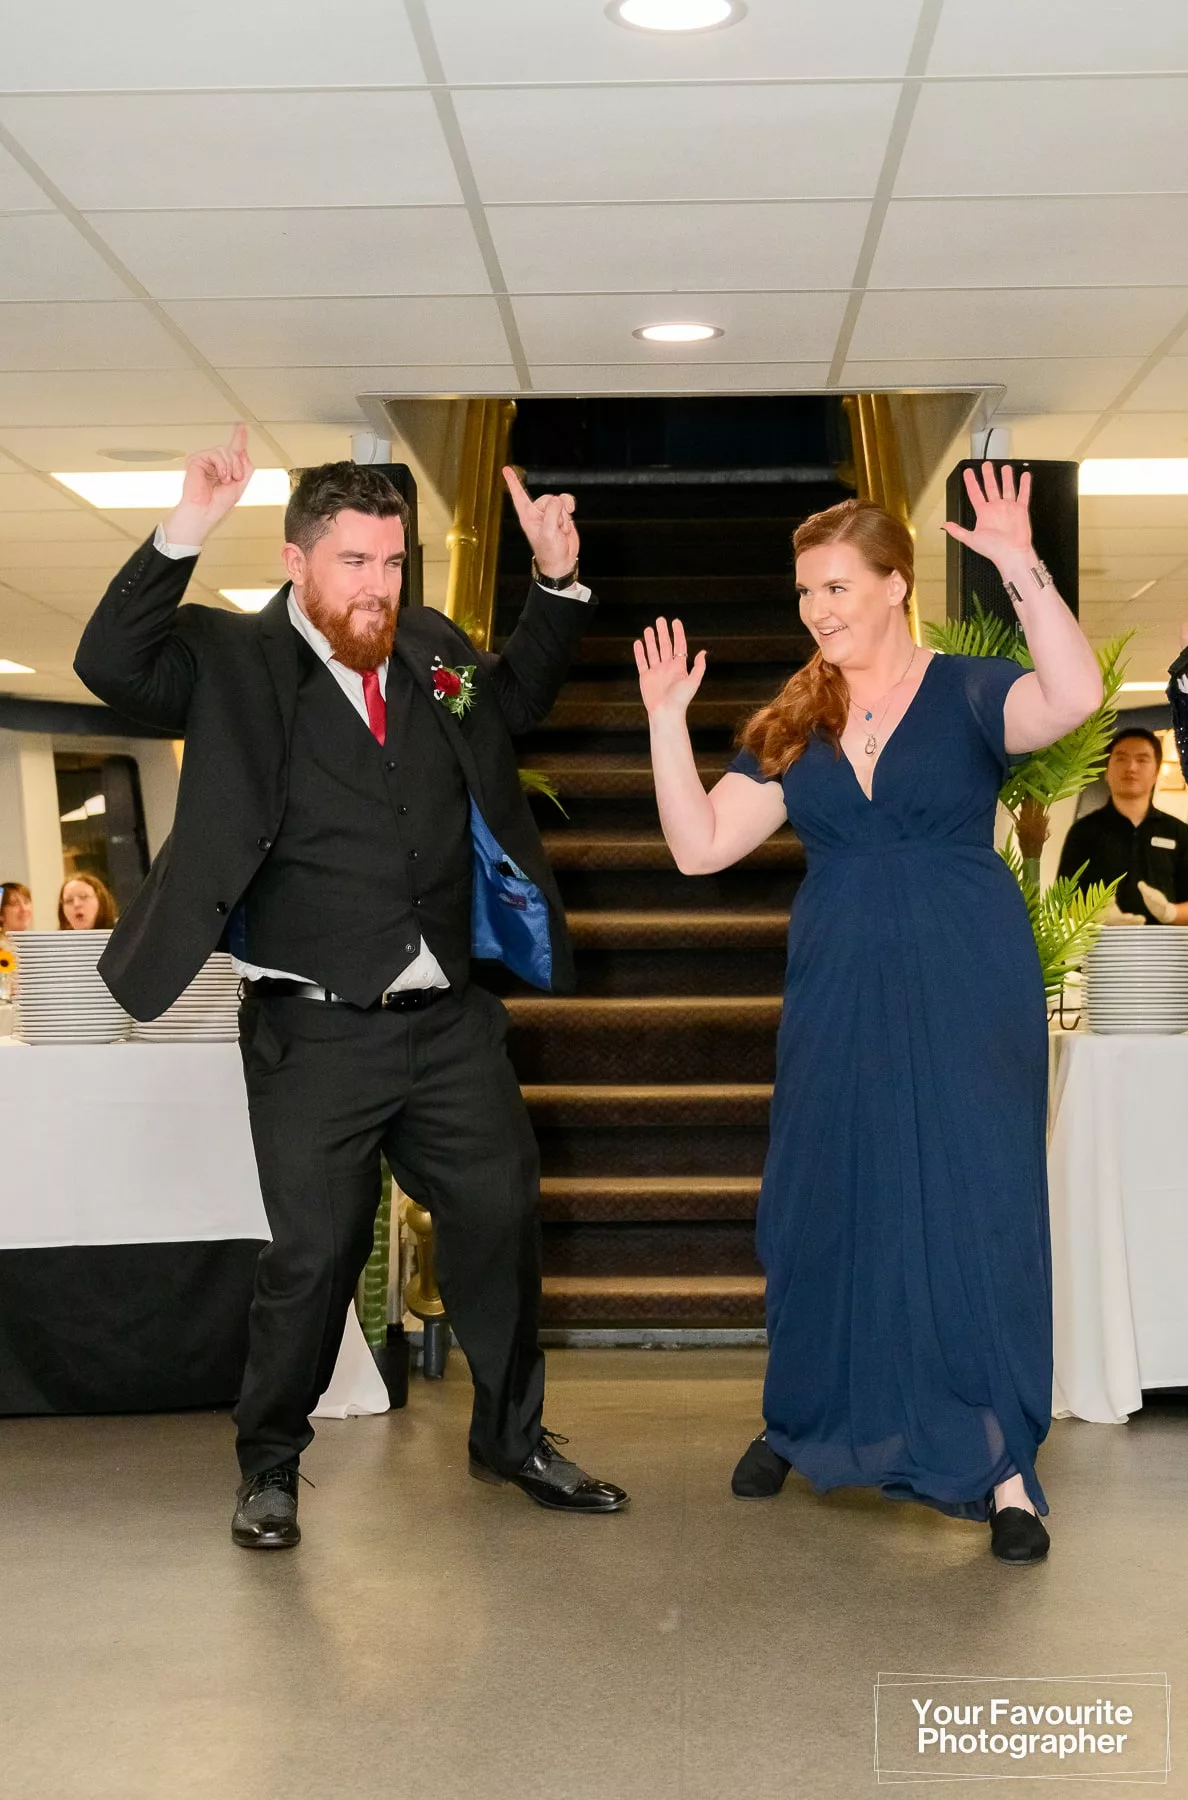 Bridesmaid and groomsman enter the reception on a boat